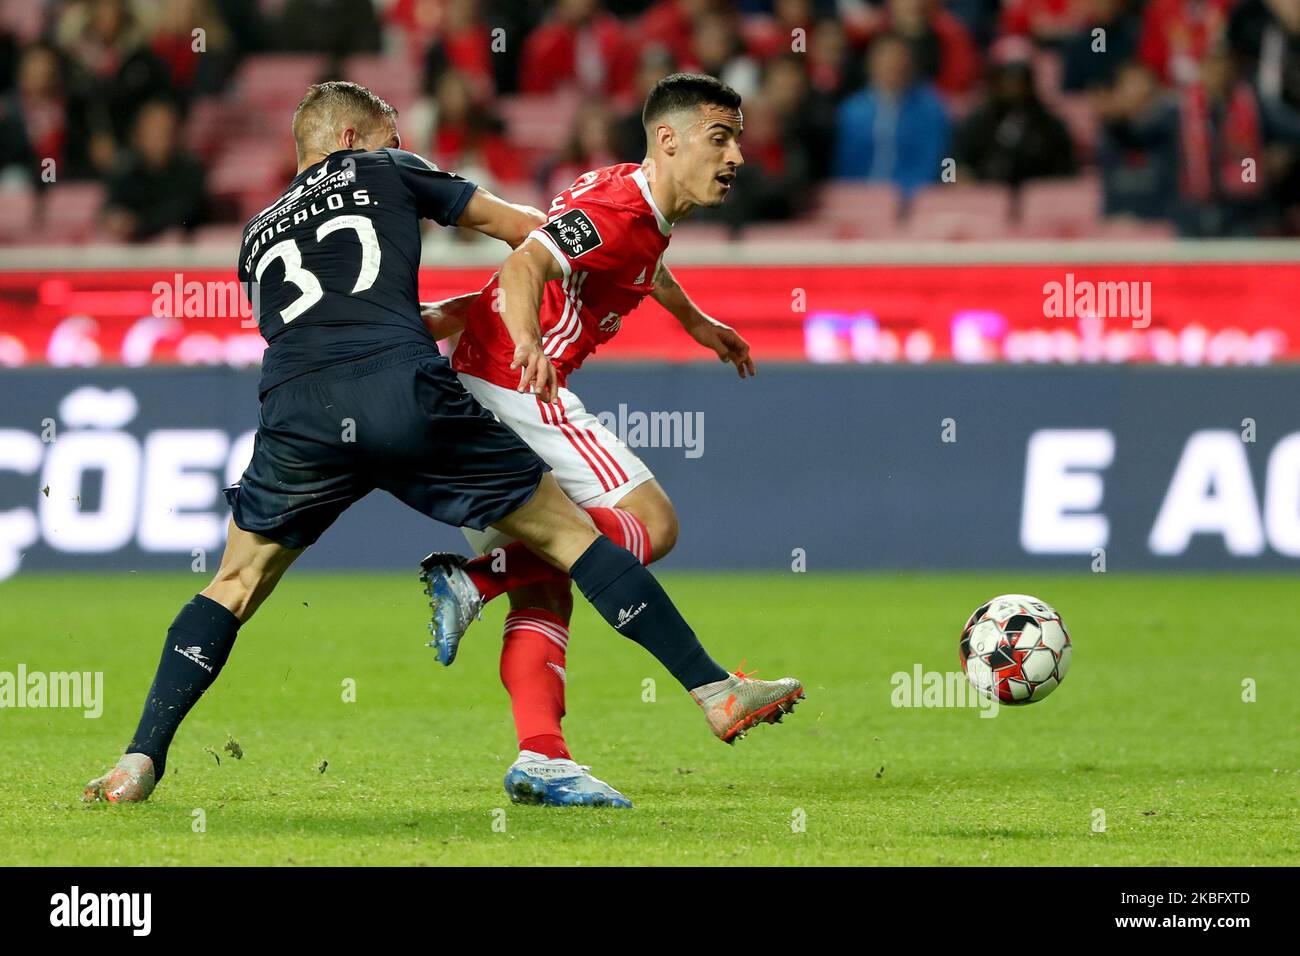 Chiquinho of SL Benfica (R ) vies with Goncalo Silva of Belenenses SAD and shoots to score during the Portuguese League football match between SL Benfica and Belenenses SAD at the Luz stadium in Lisbon, Portugal on January 31, 2020. (Photo by Pedro FiÃºza/NurPhoto) Stock Photo